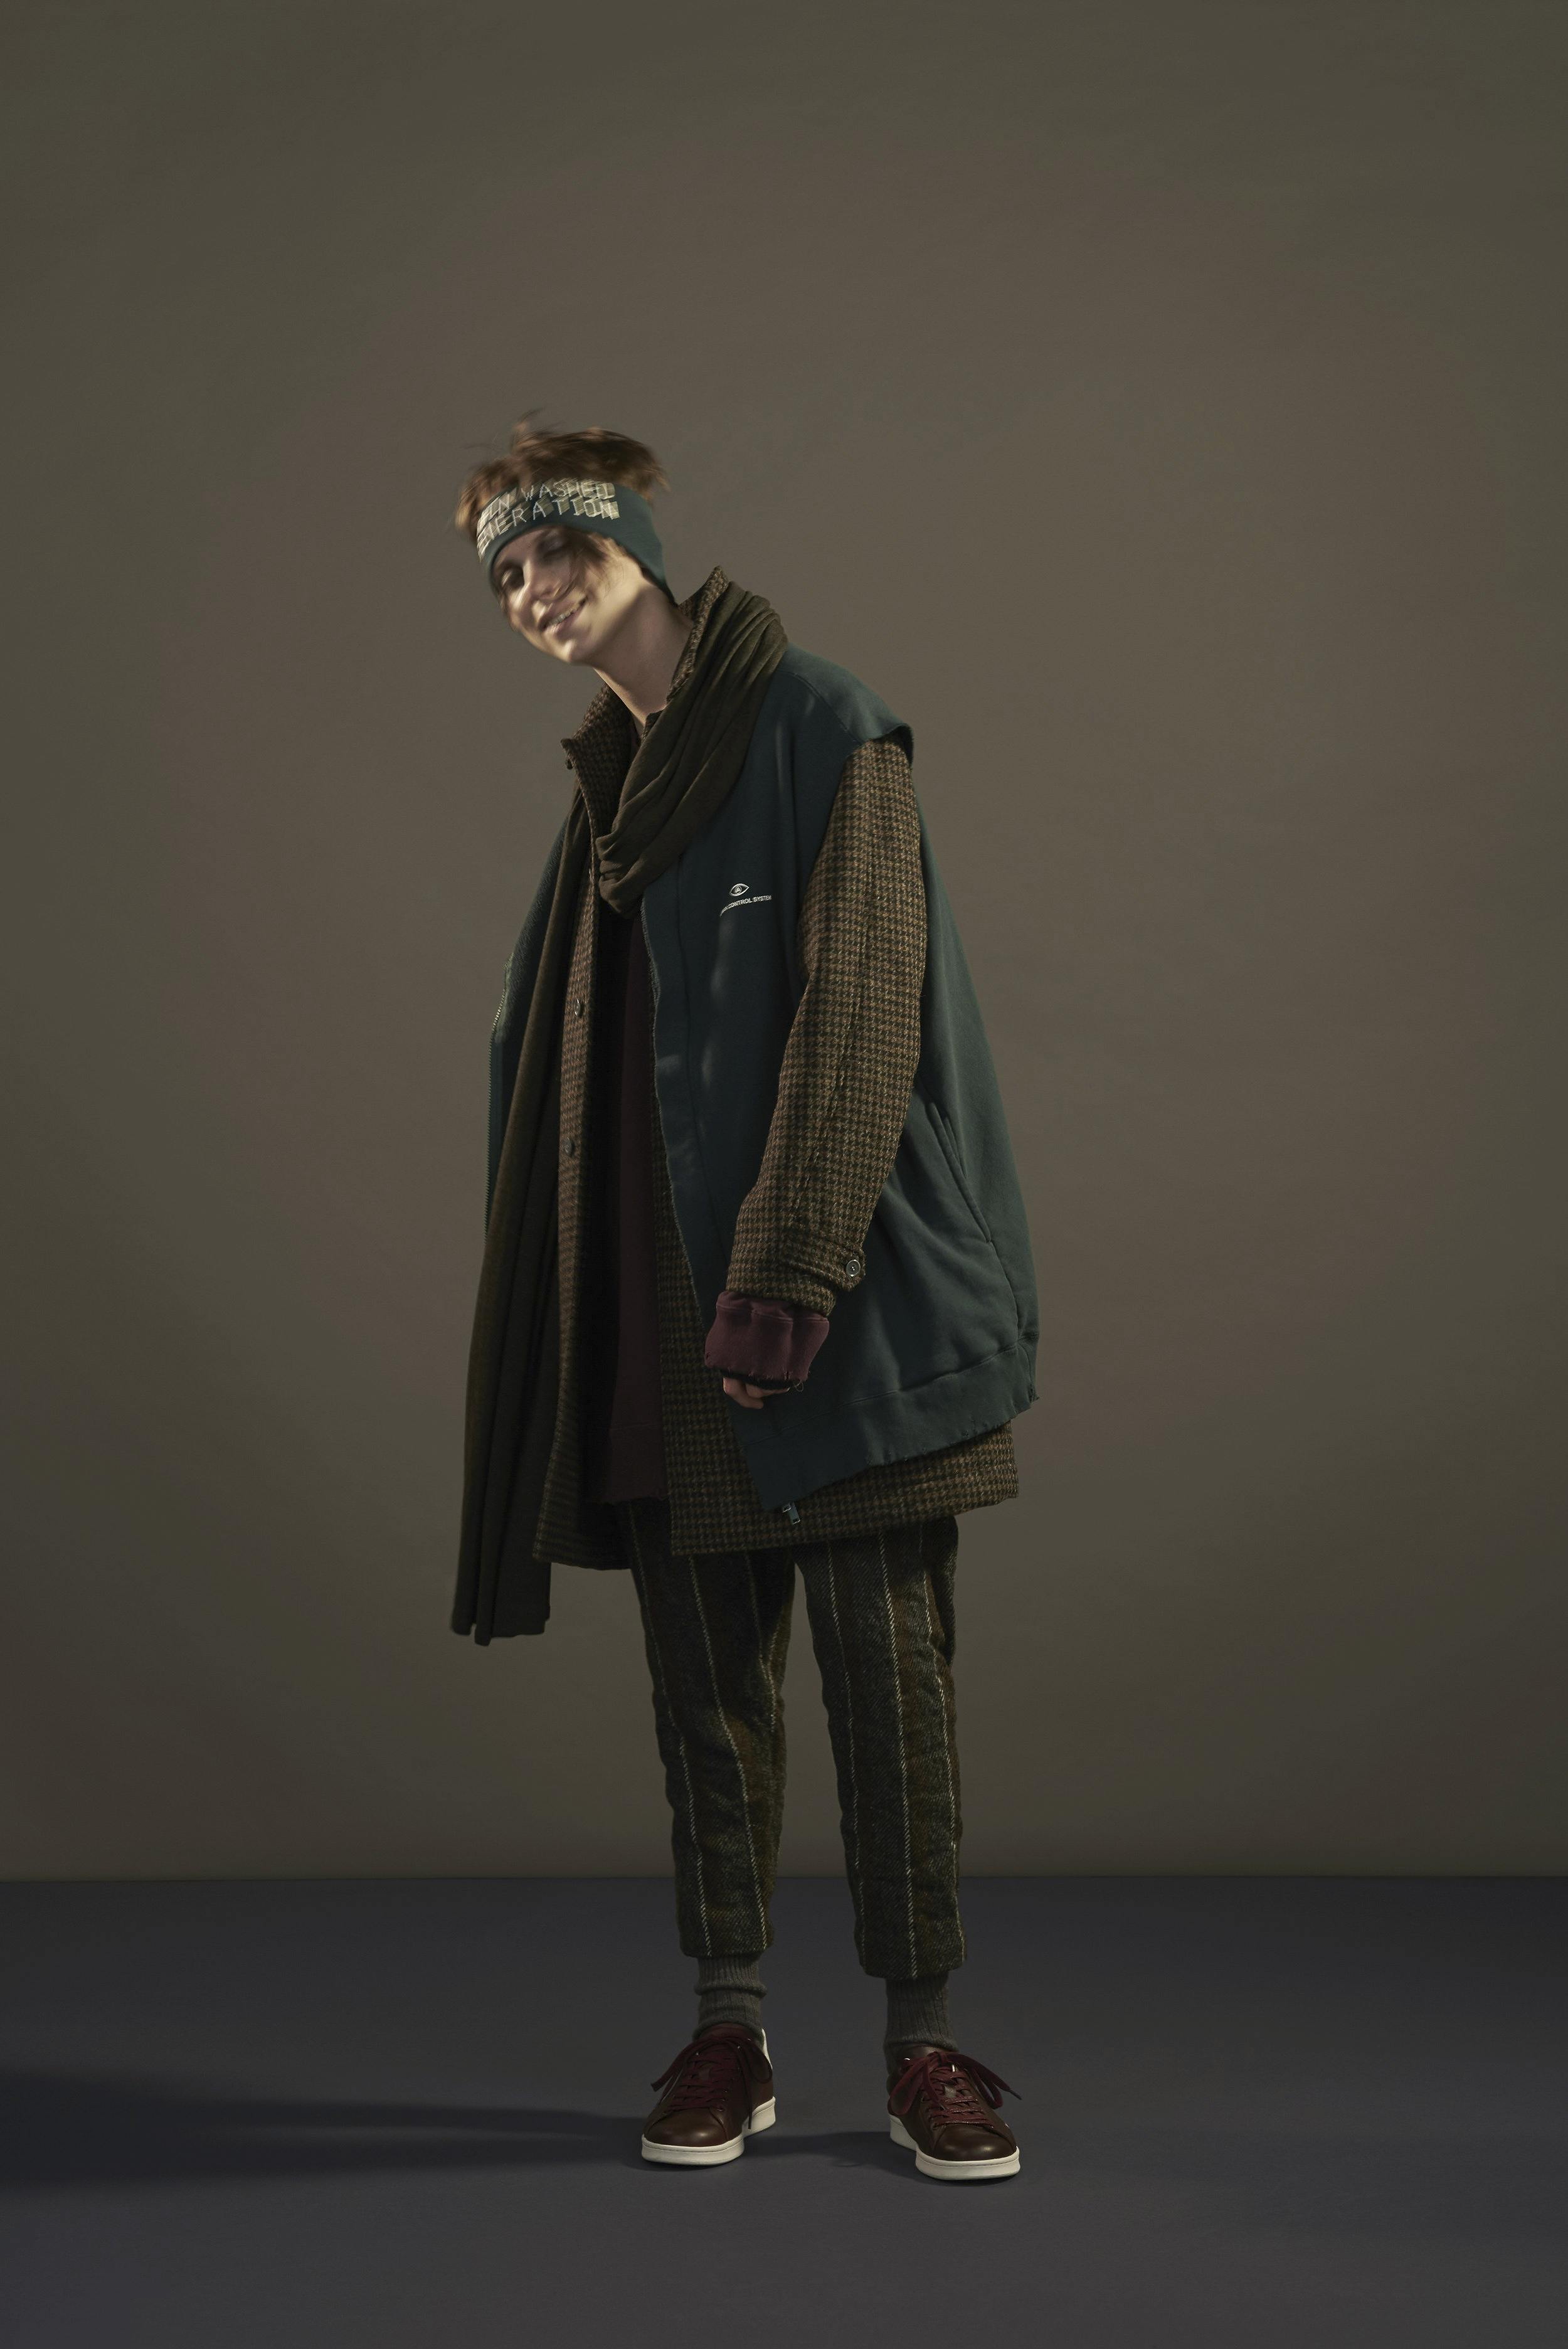 undercover-fw17-article-7